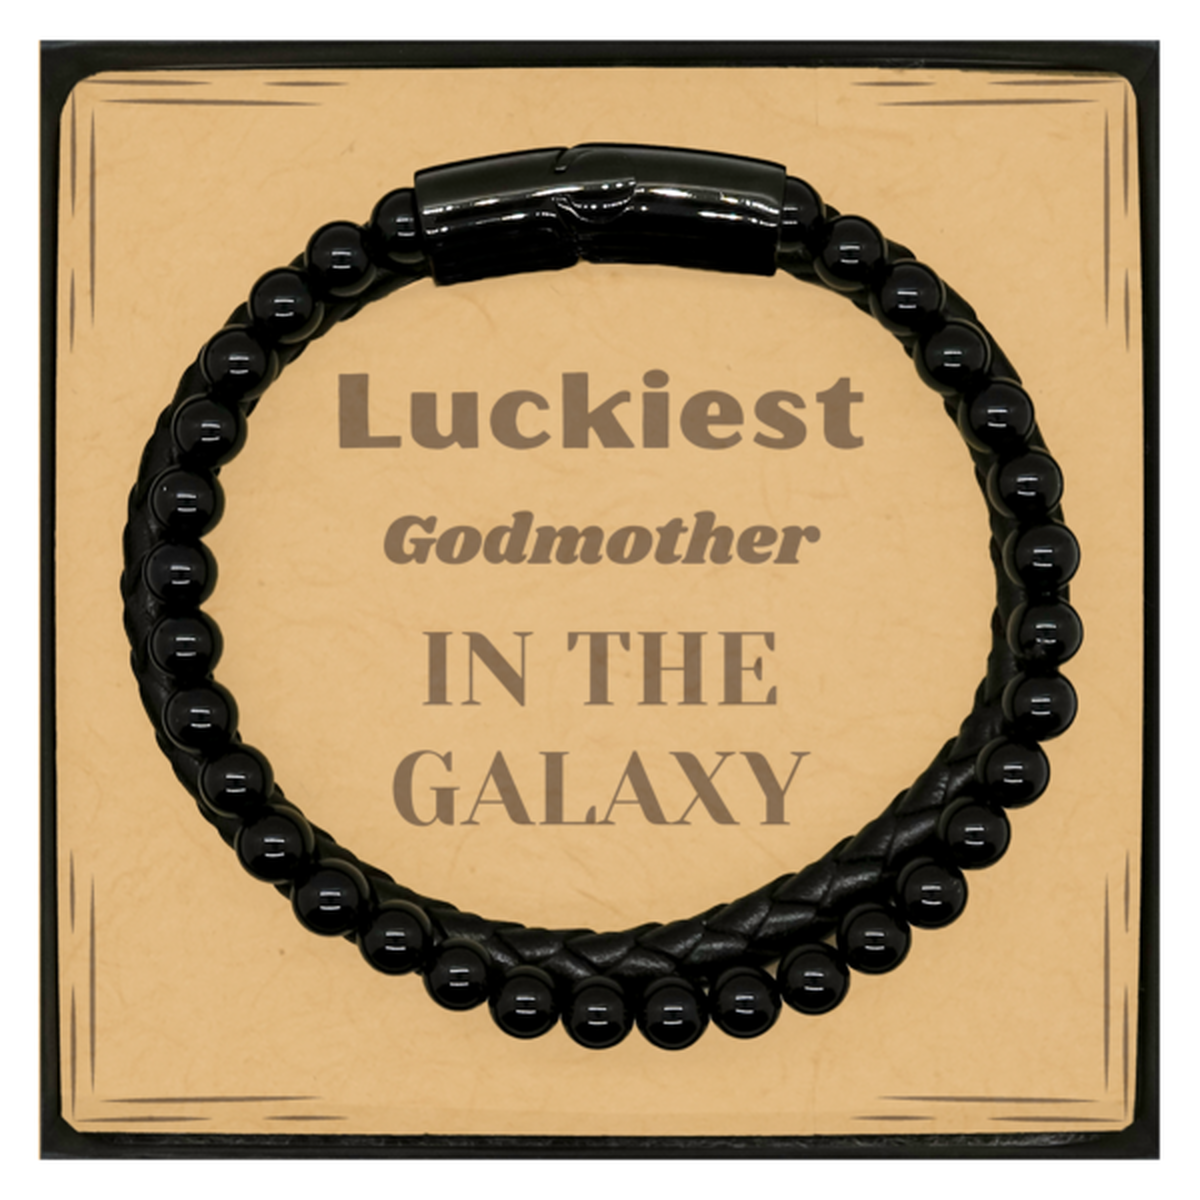 Luckiest Godmother in the Galaxy, To My Godmother Message Card Gifts, Christmas Godmother Stone Leather Bracelets Gifts, X-mas Birthday Unique Gifts For Godmother Men Women